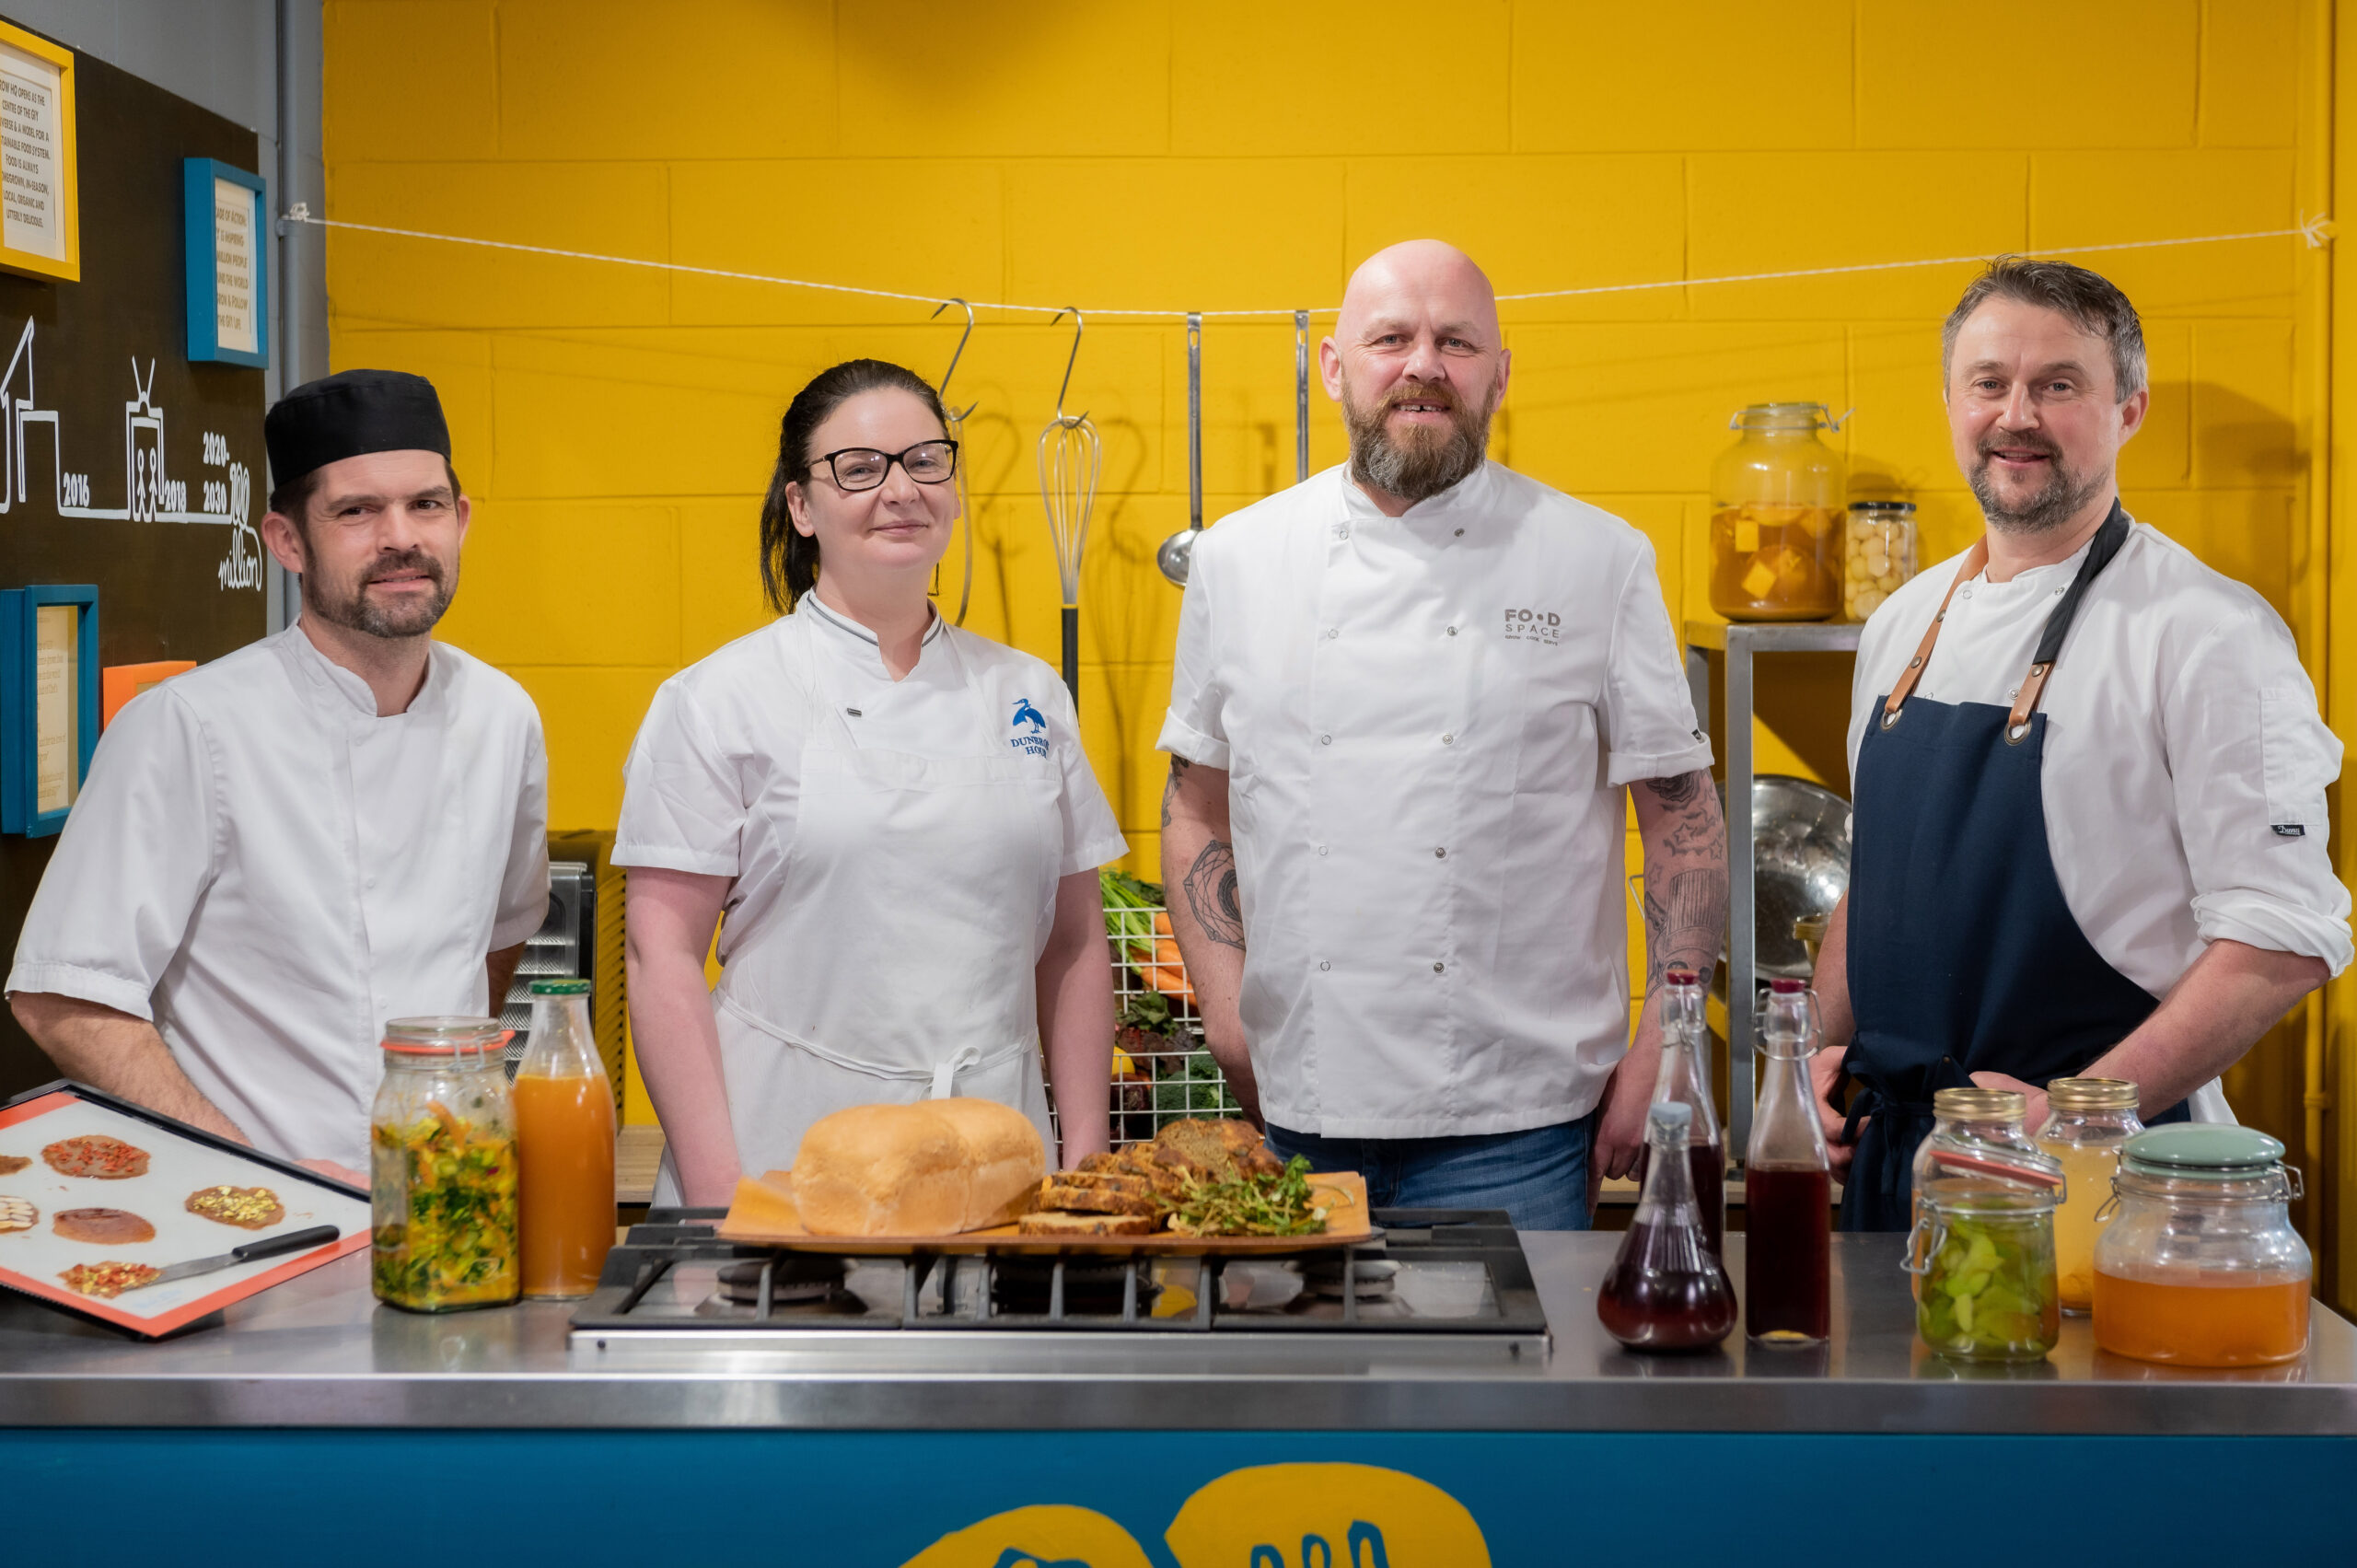 GIY launch ‘WASTED’ with some of Ireland’s Top Chefs on board